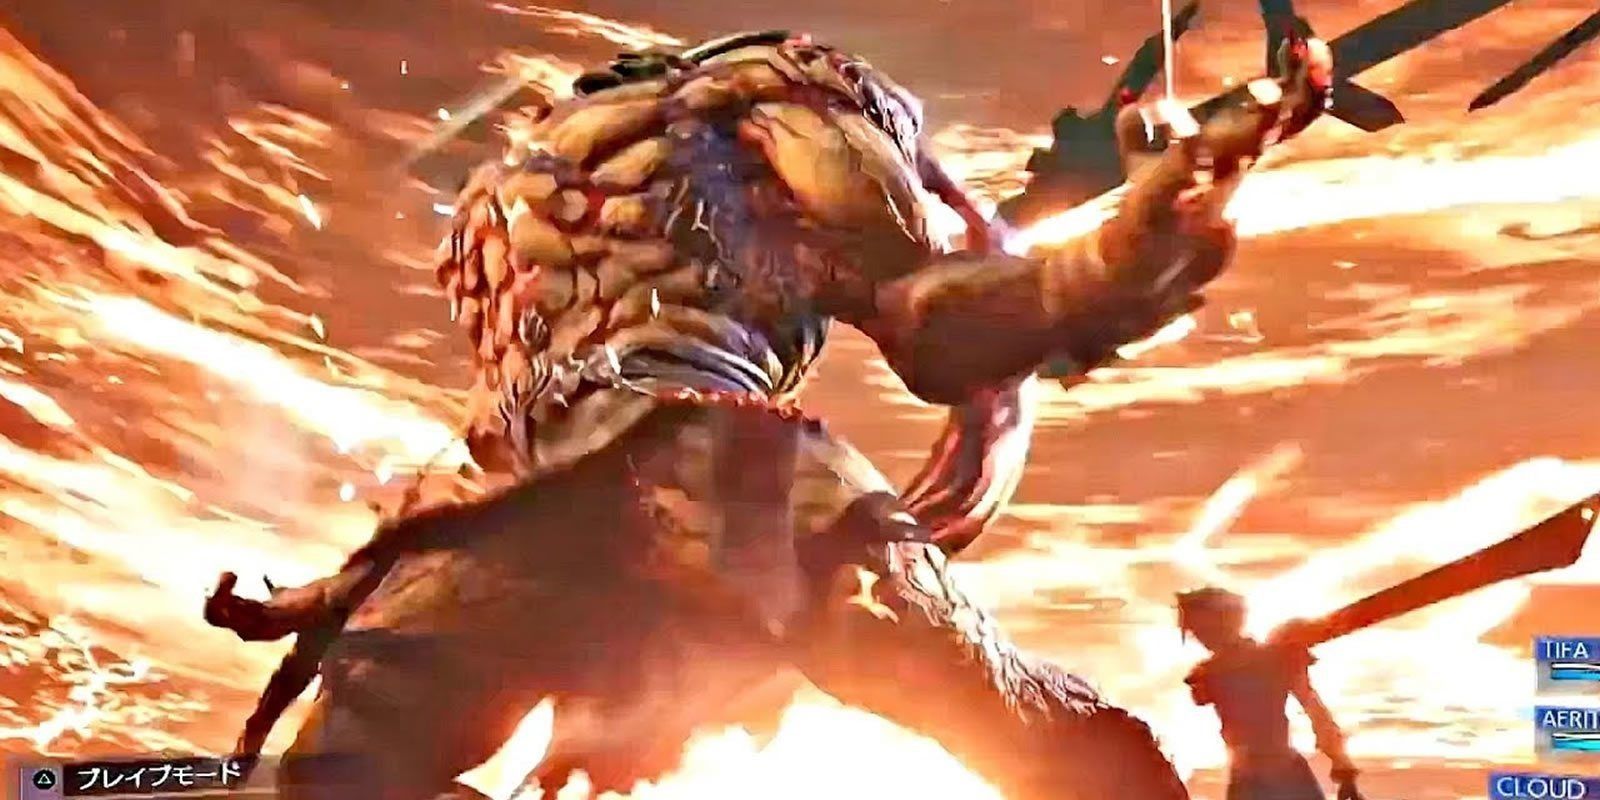 Final Fantasy 7 Remake Summons Guide: How to Unlock Ifrit